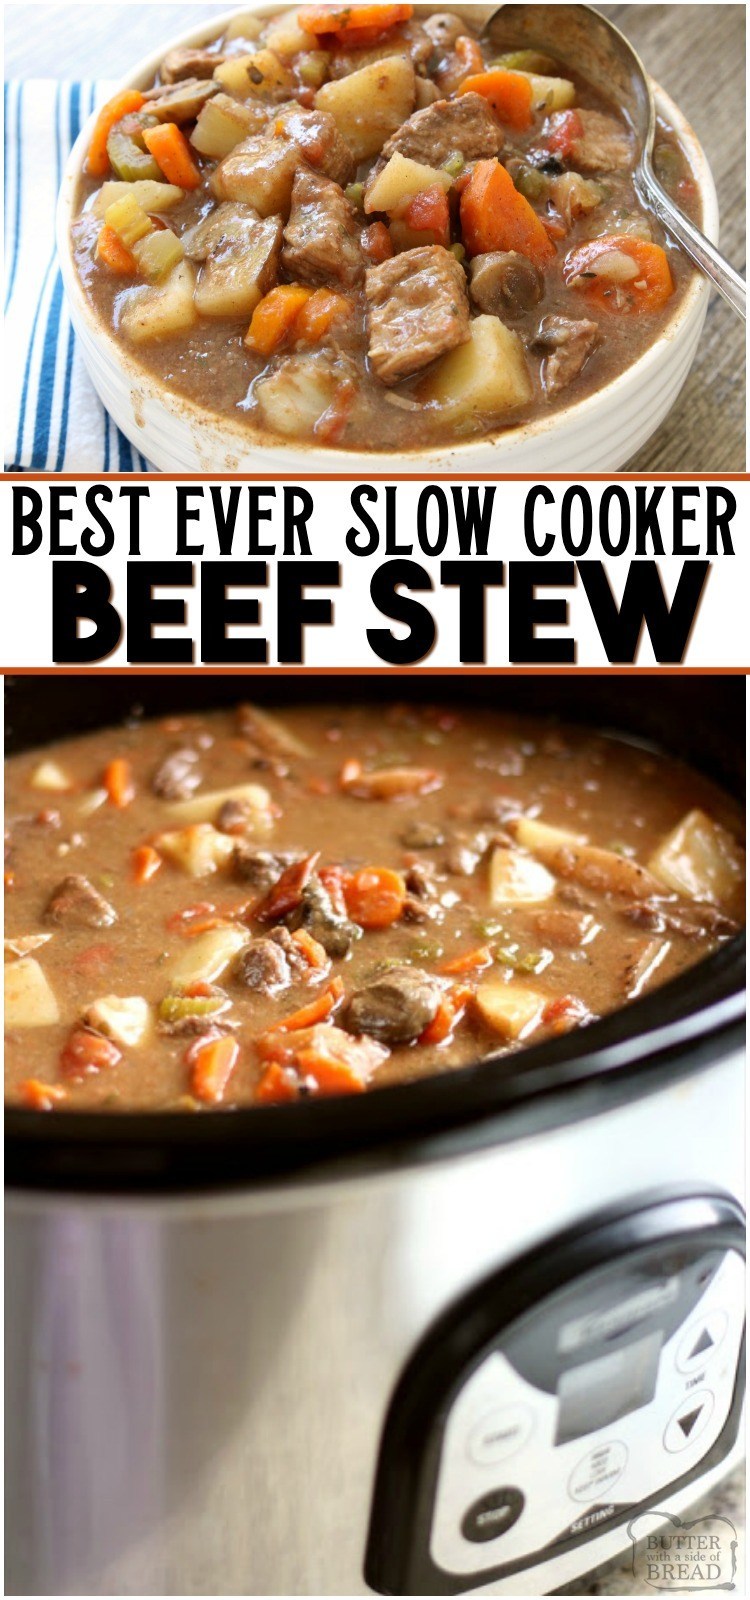 Beef Stew Crock Pot recipe made with tender chunks of beef, loads of vegetables and a simple mixture of broth and spices that yields the BEST slow cooker beef stew ever! #beef #stew #stewrecipe #slowcooker #crockpot #beefstew #homemadestew from BUTTER WITH A SIDE OF BREAD